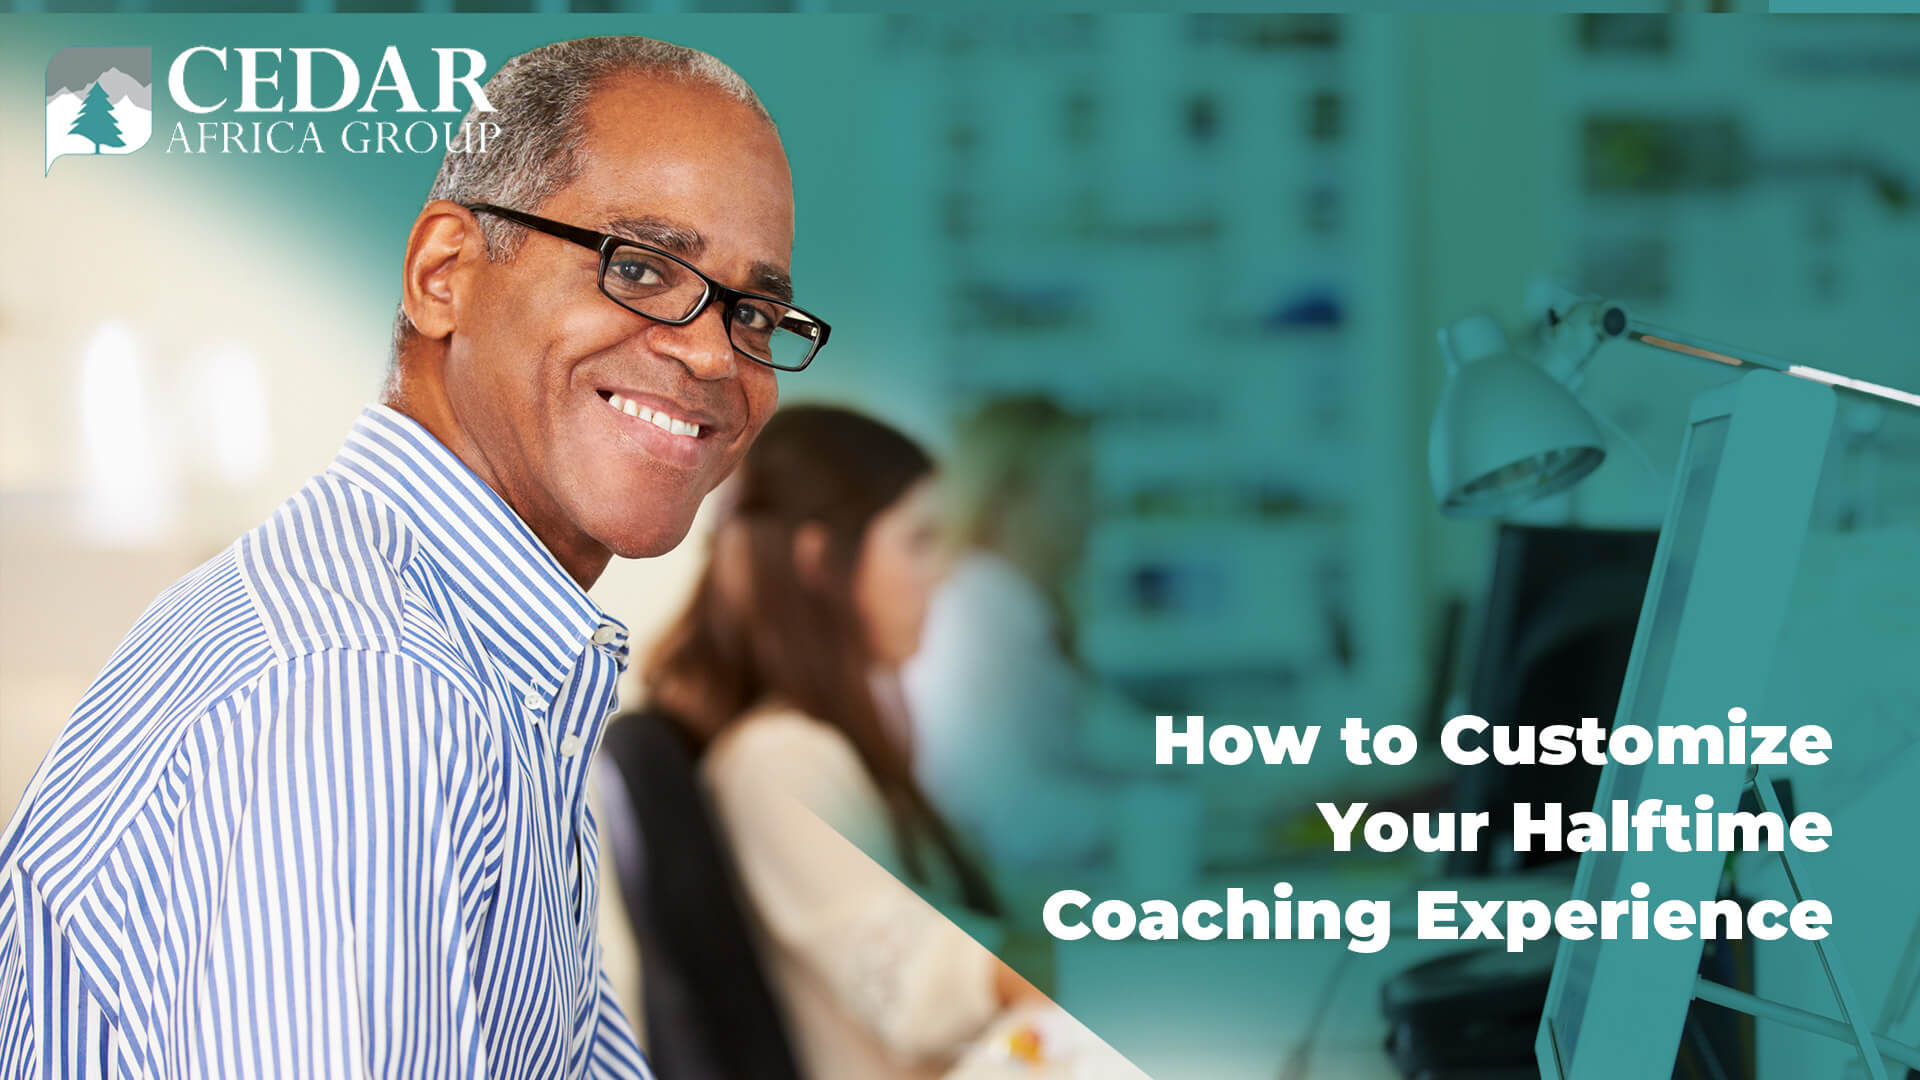 How to customize your halftime coaching experience